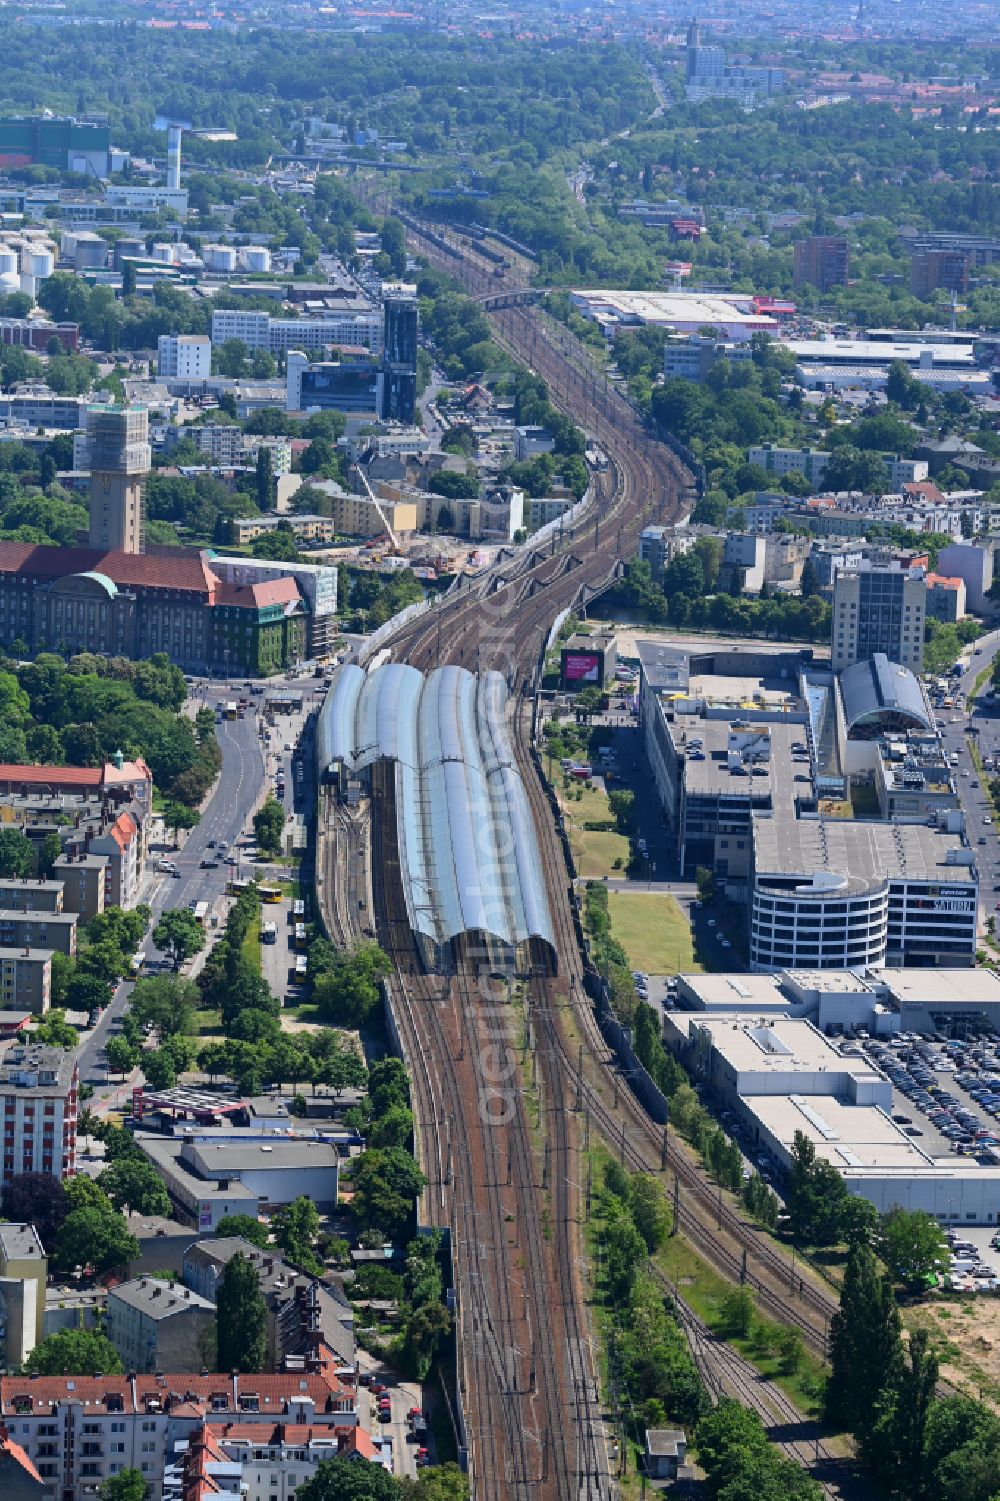 Berlin from above - Tracks of the Spandau S-Bahn station and the Spandau Arcaden shopping centre on Klosterstrasse in the Spandau district of Berlin, Germany